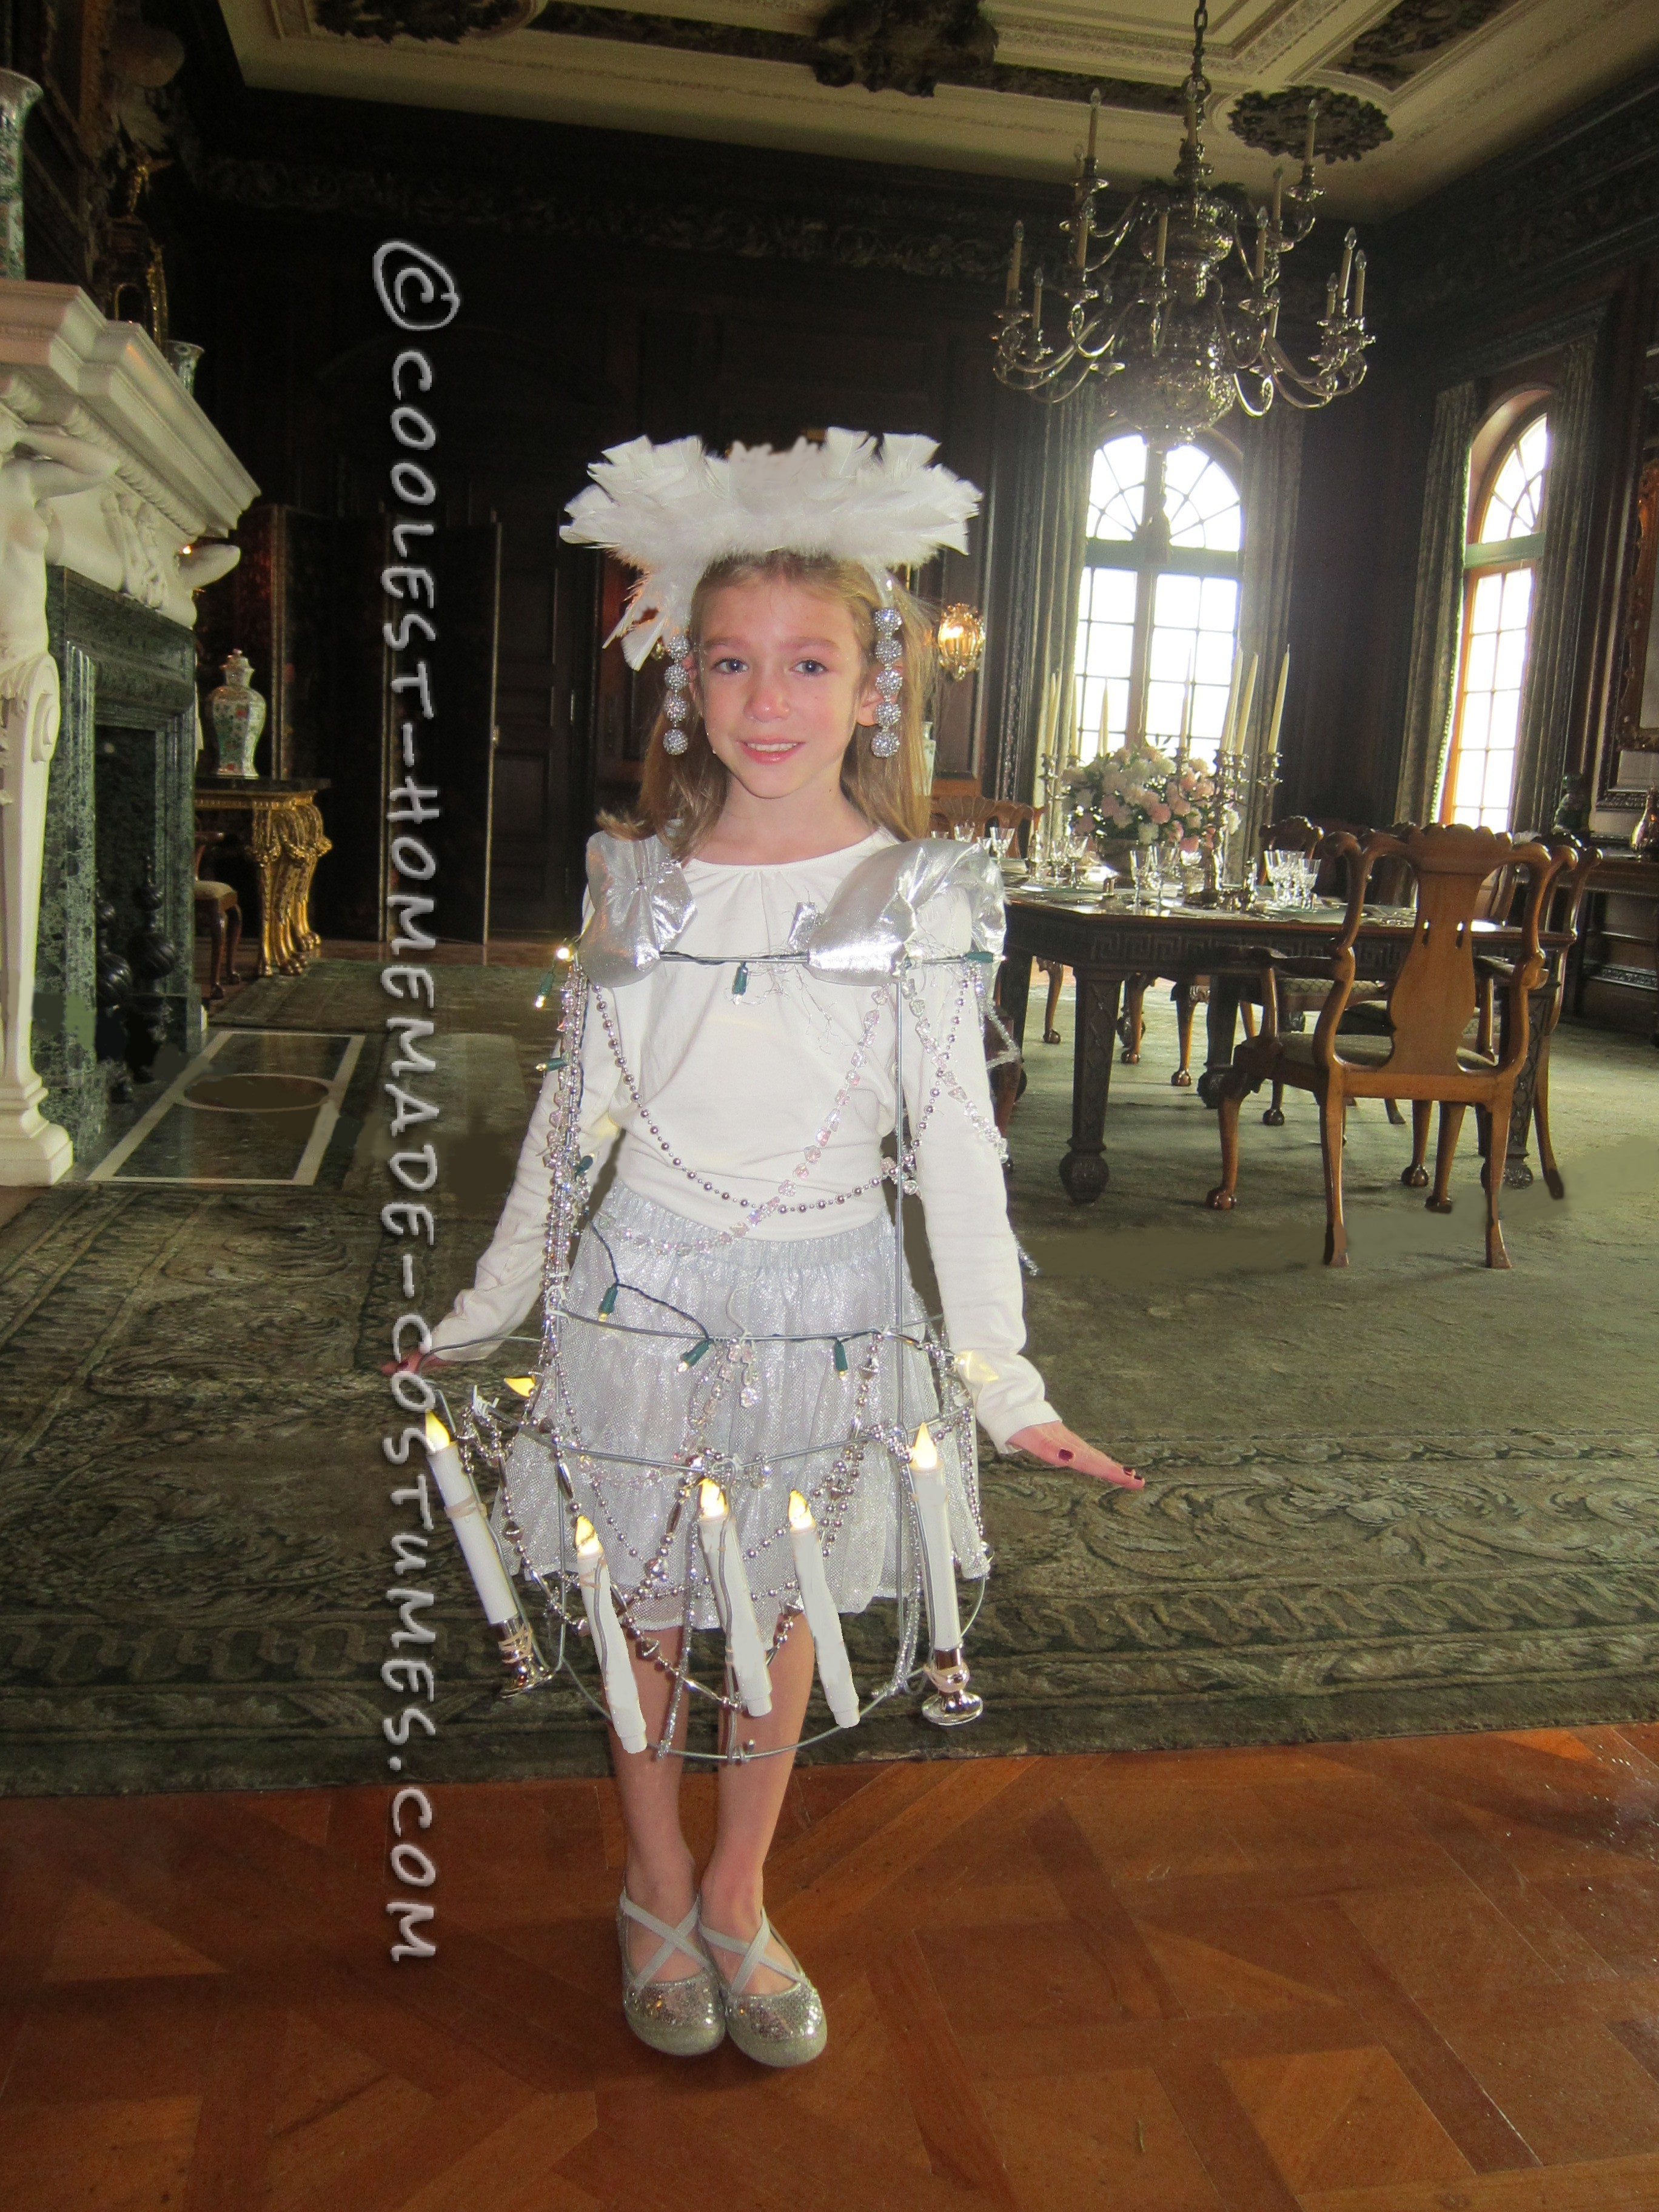 Cool DIY Costume Idea: My Bright Daughter - The Chandelier!